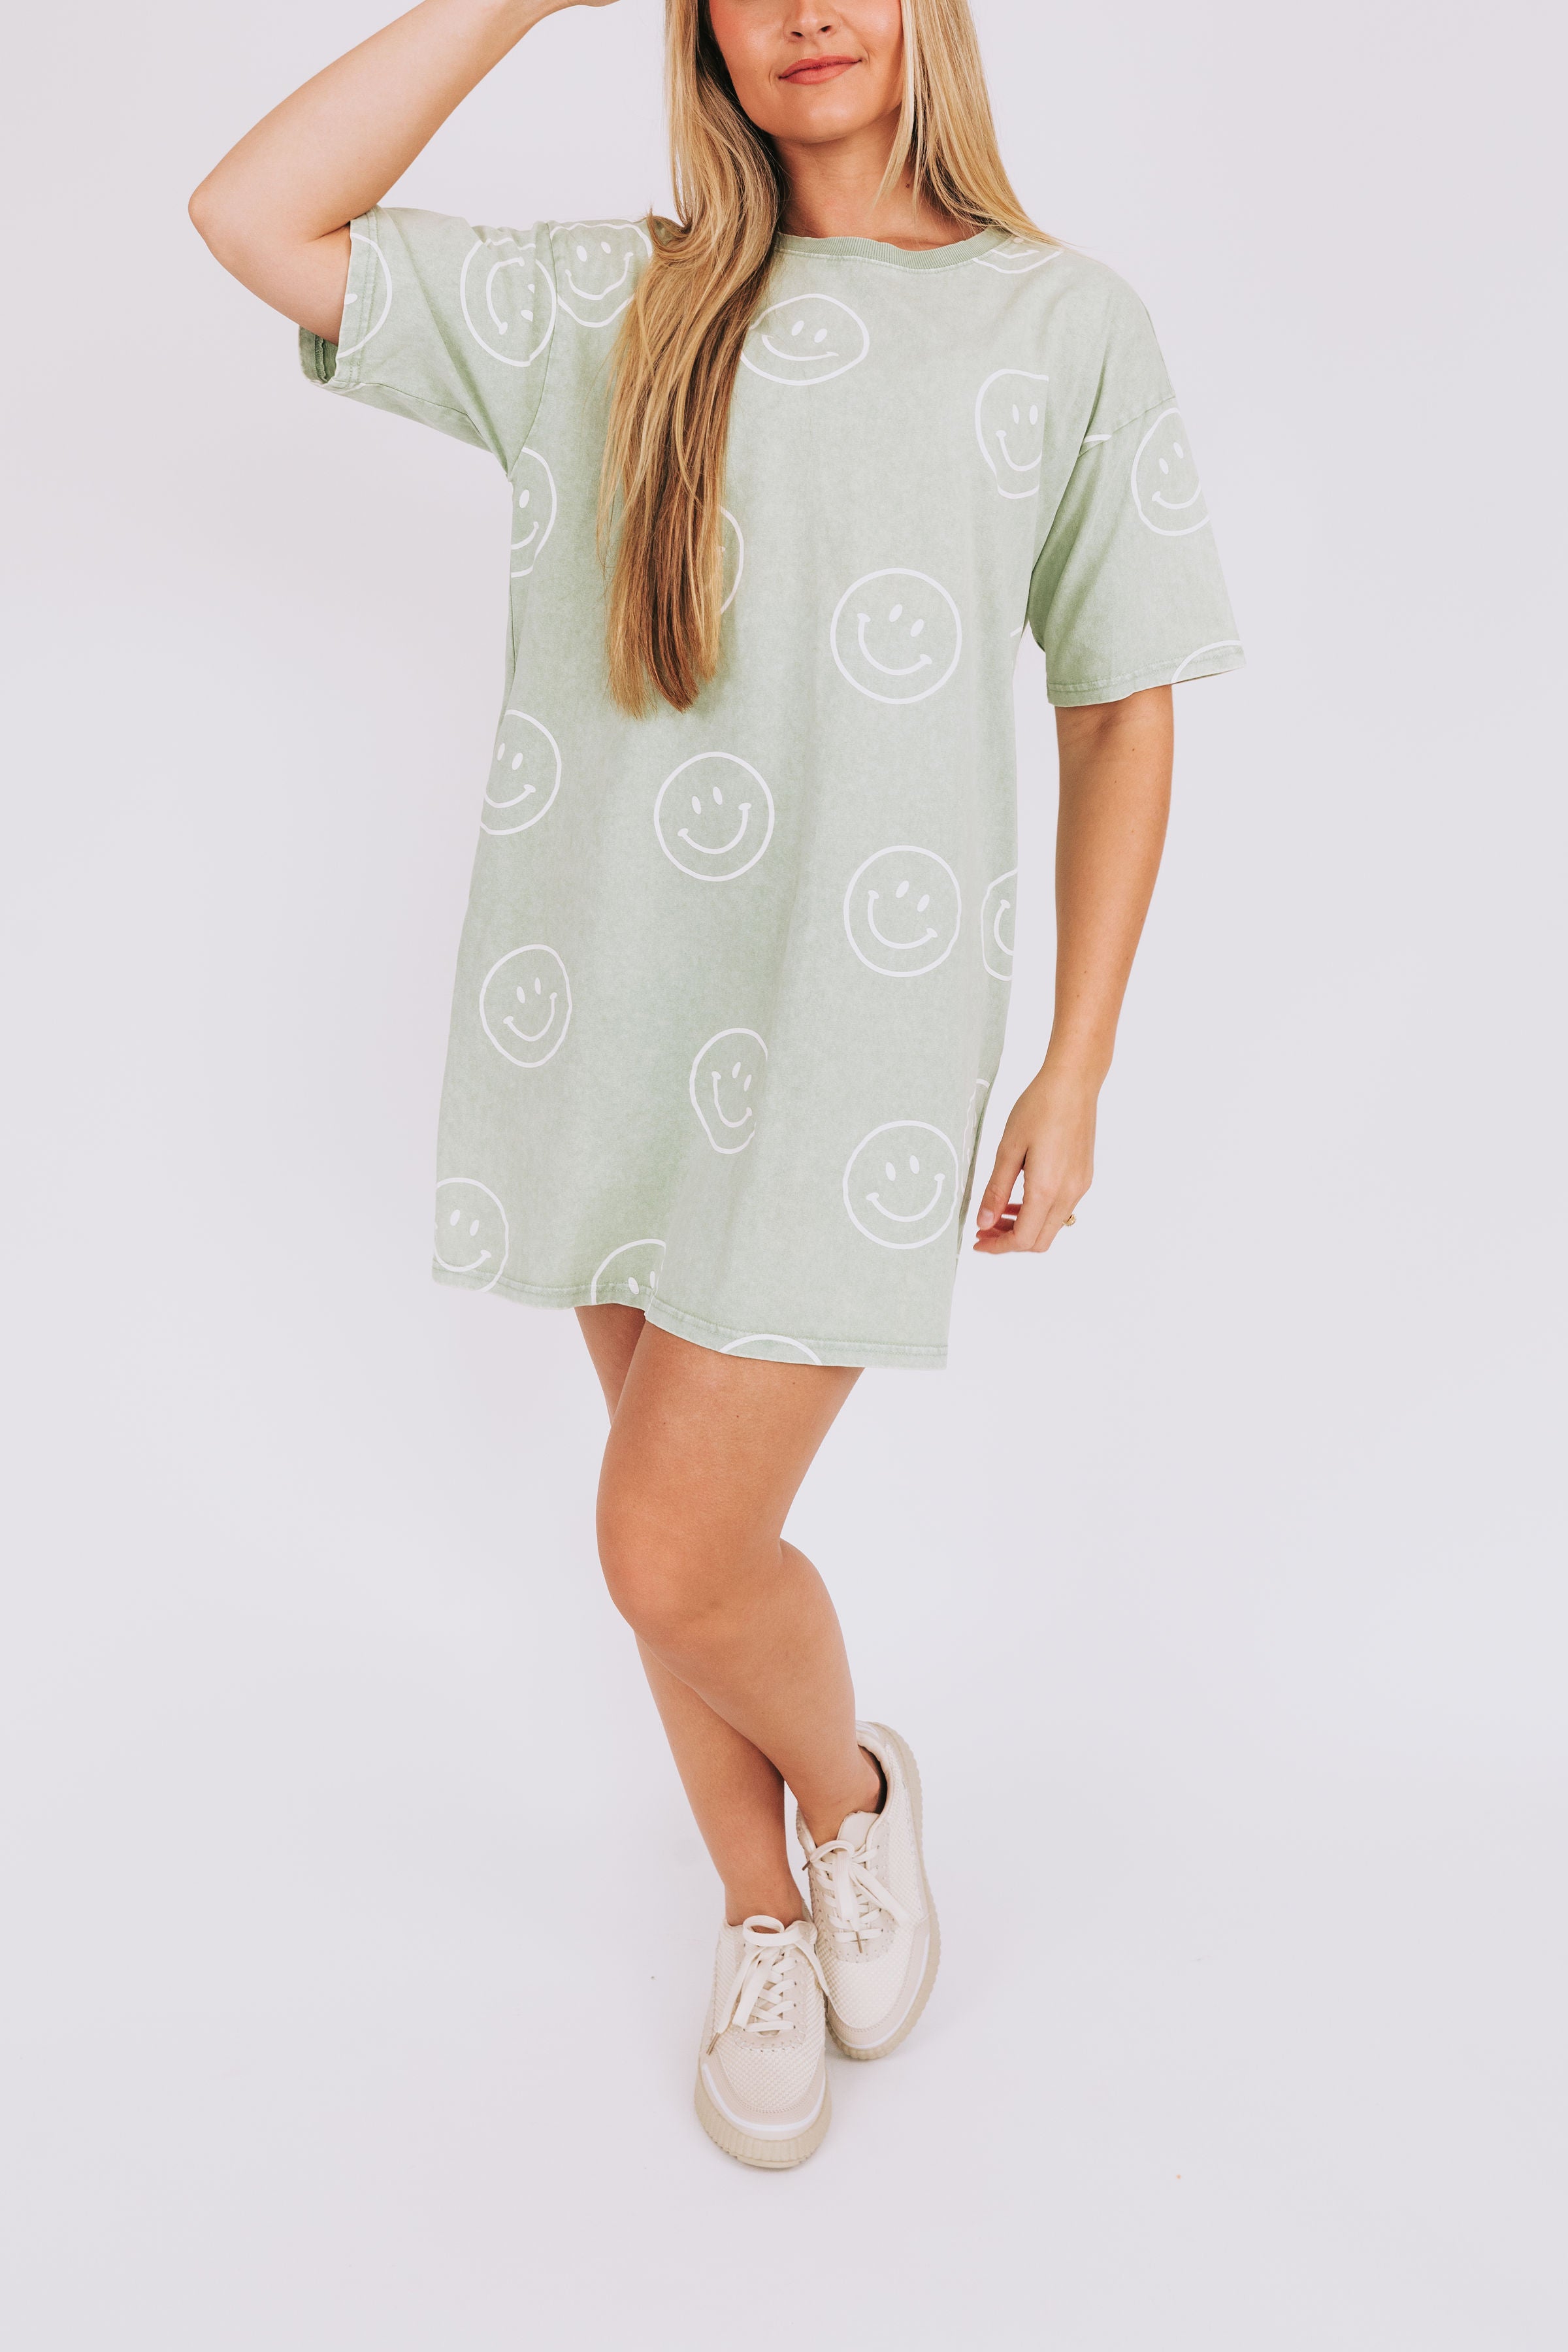 Smile Says It All Dress - New Color!